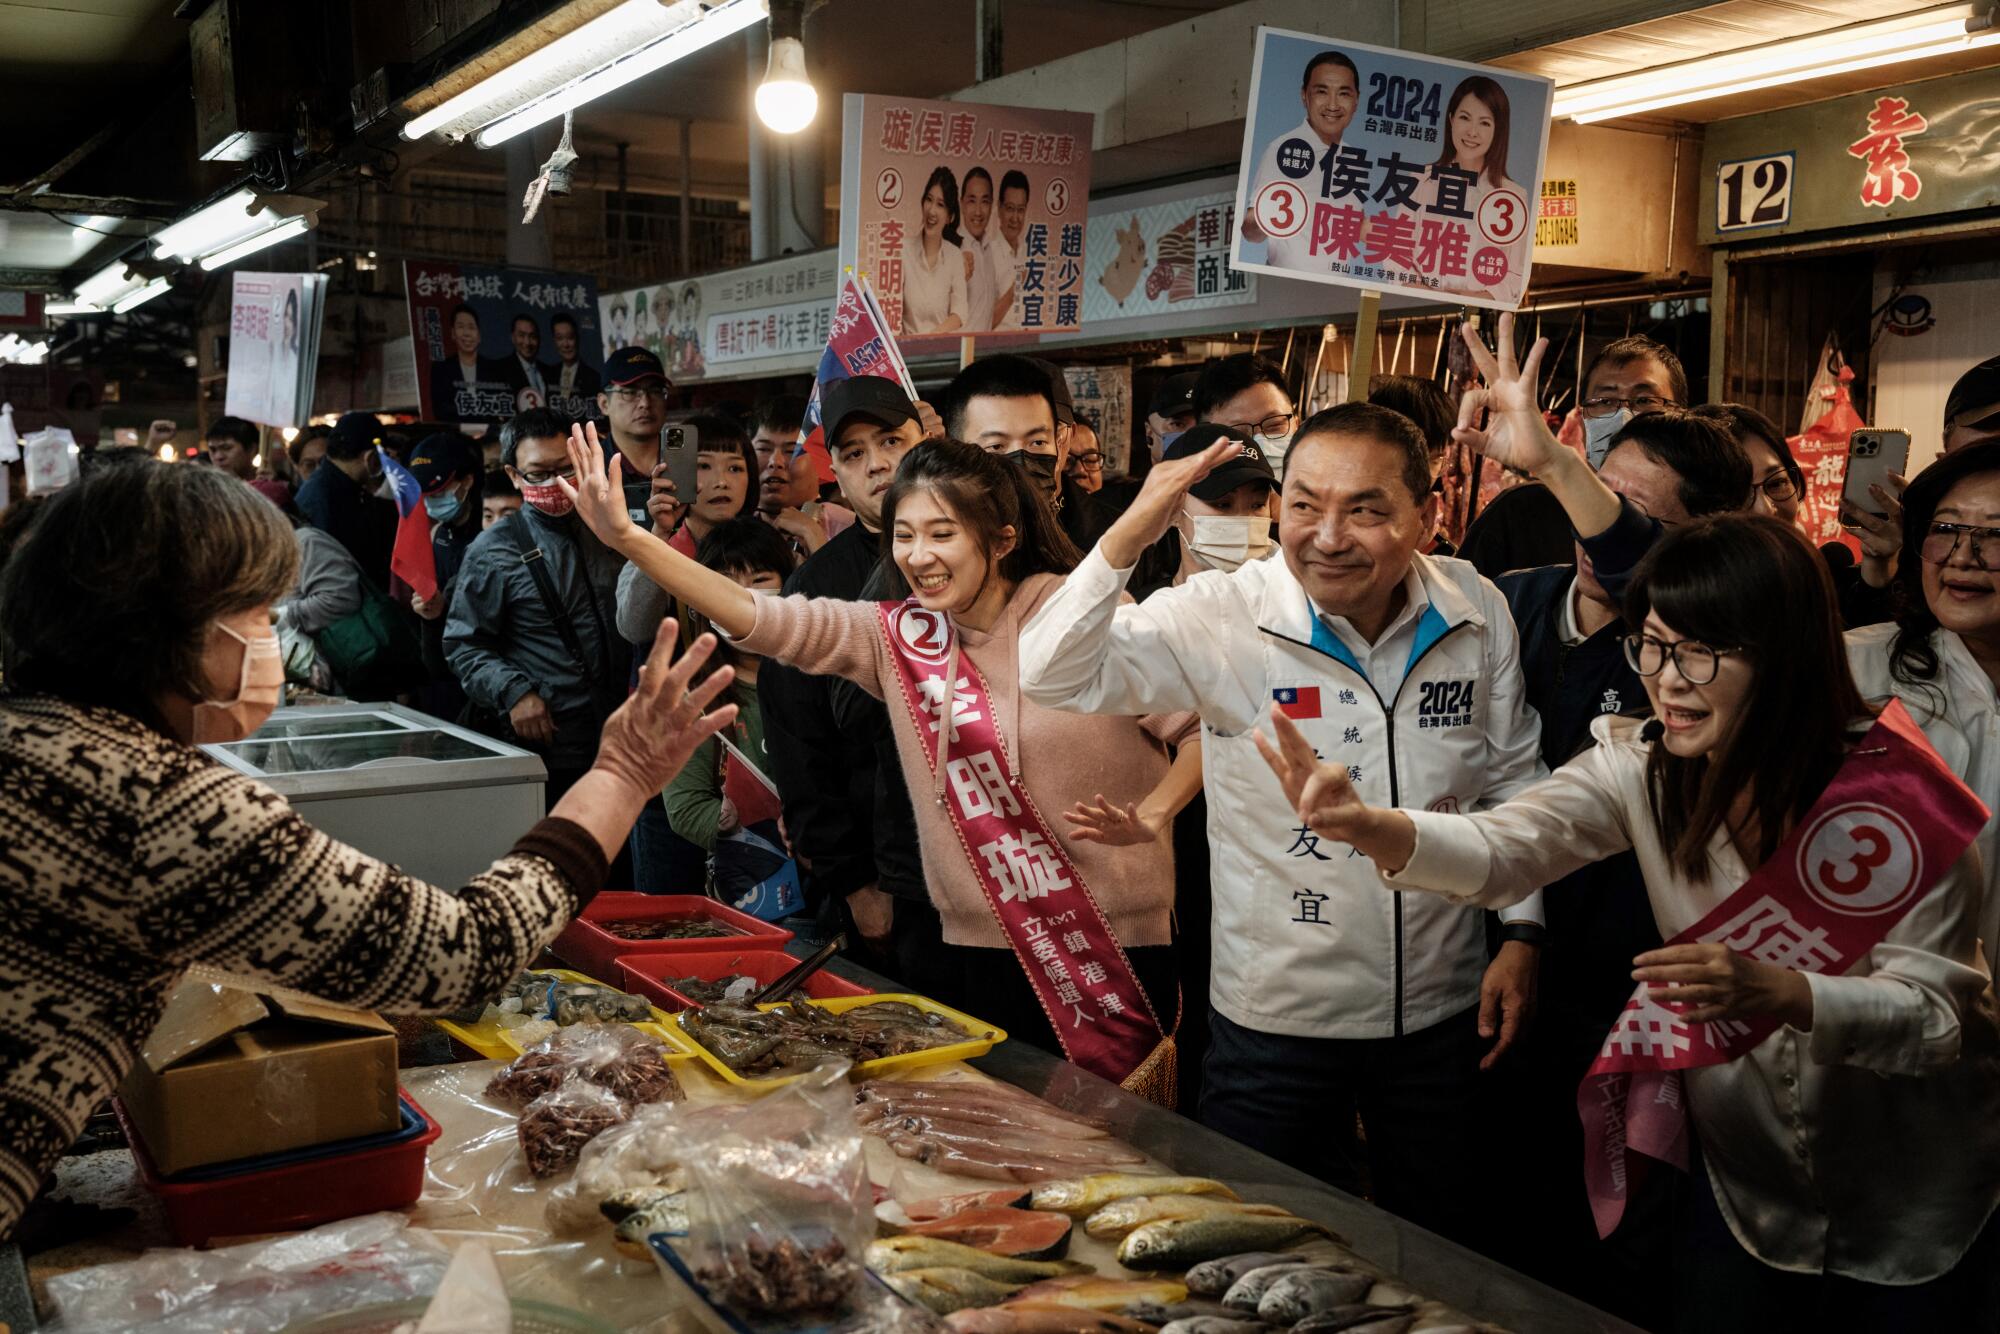 A political candidate and his supporters in a crowded market